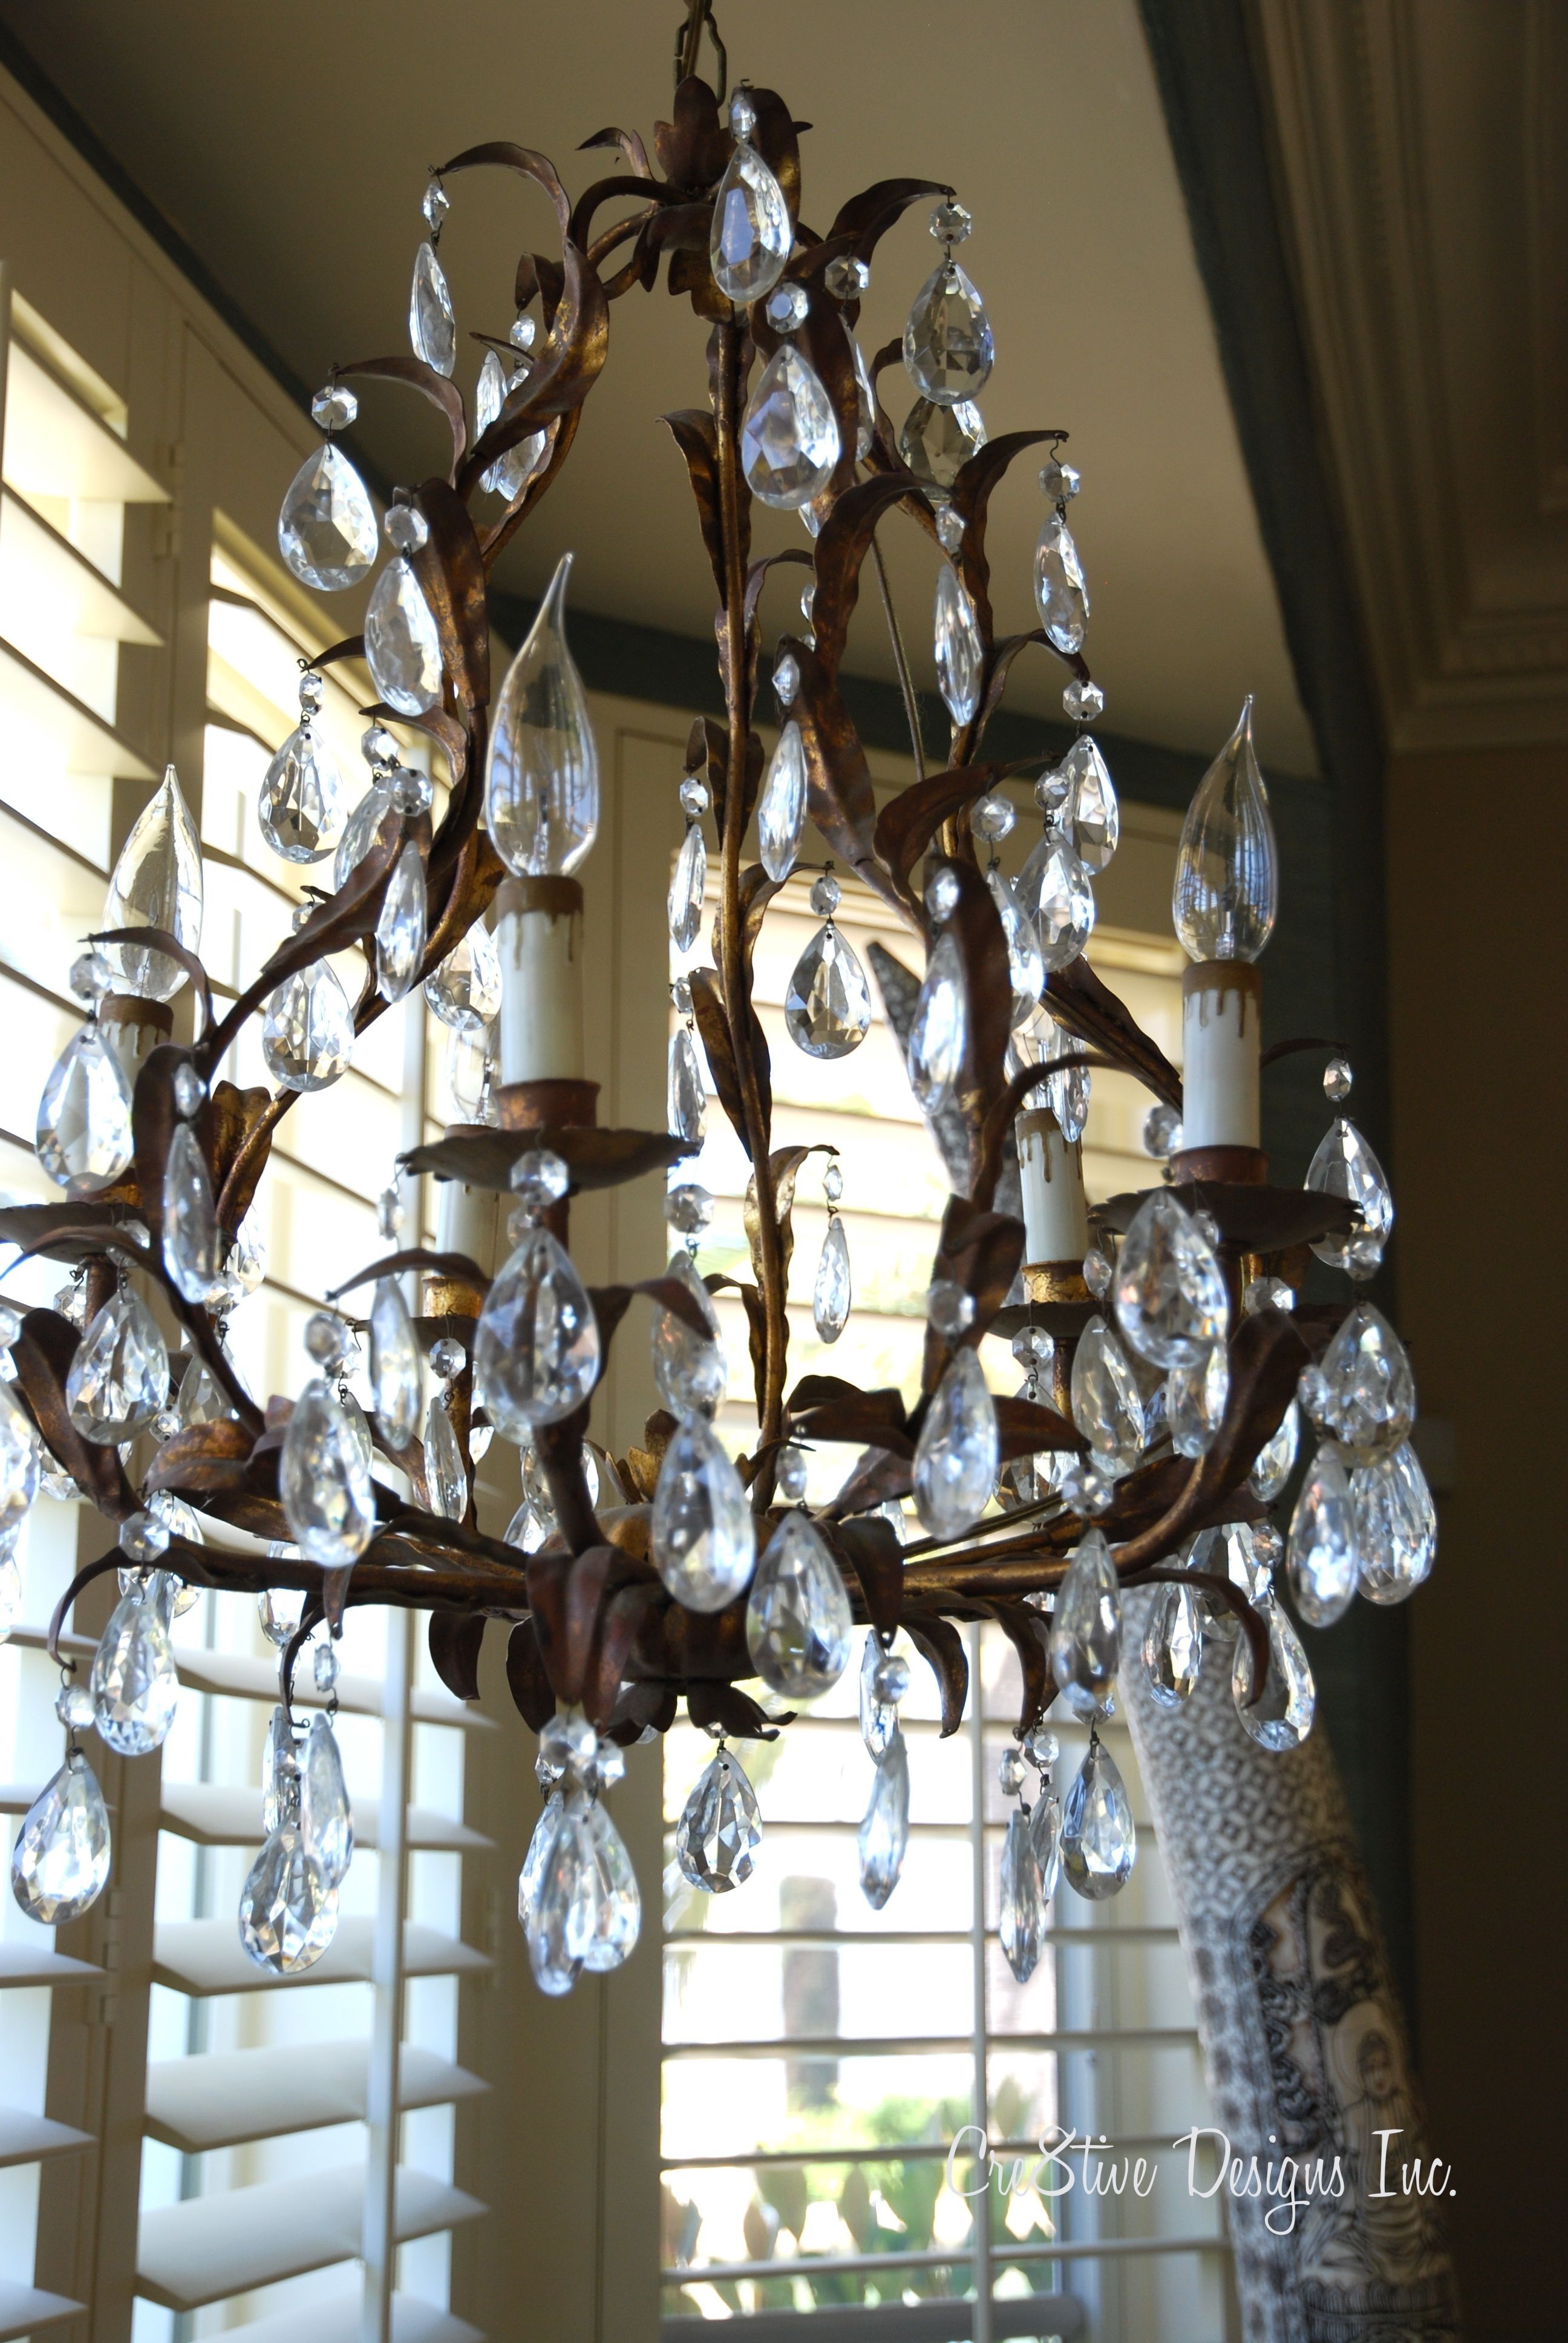 Chandelier Accessories Popular In Small Home Decoration Ideas With With Chandelier Accessories (View 2 of 15)